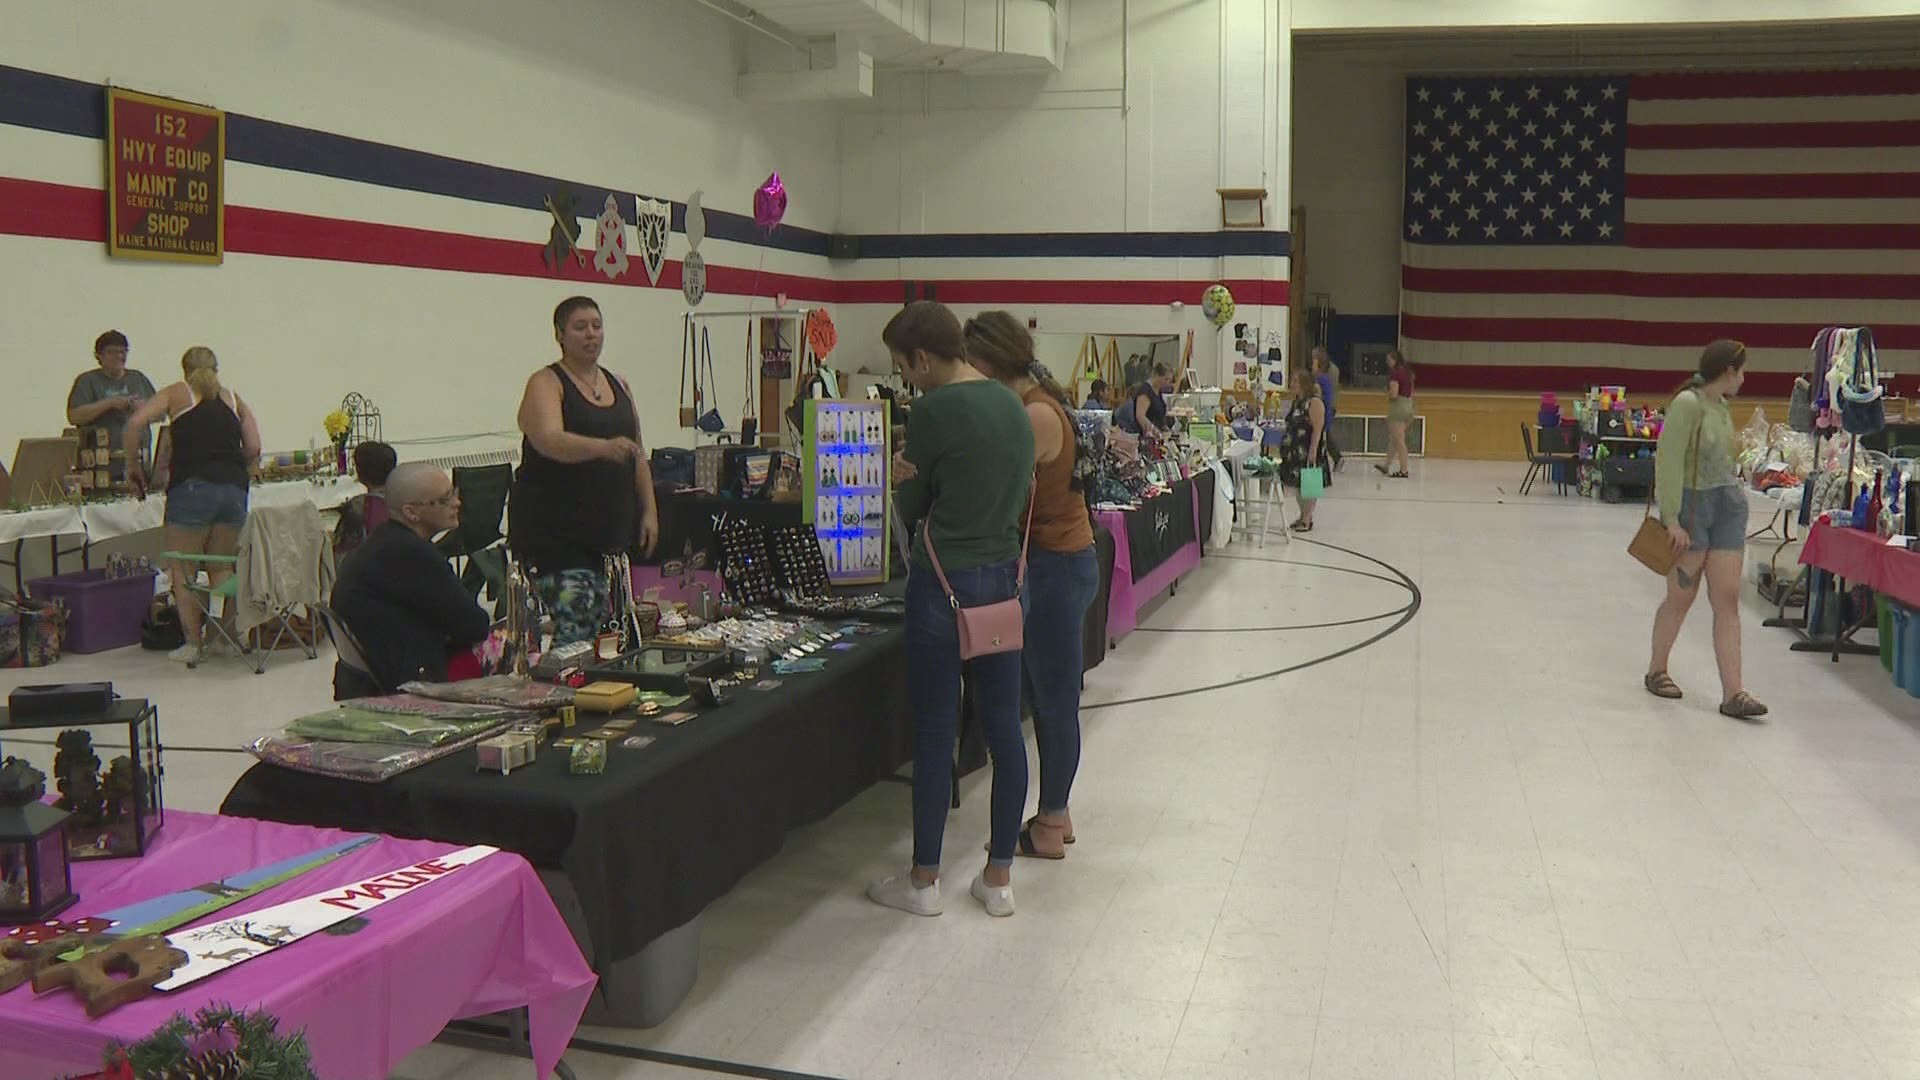 The Giving Tree of Maine which helps people in need hosted a fundraising Artisan and Vendor fair in Augusta.